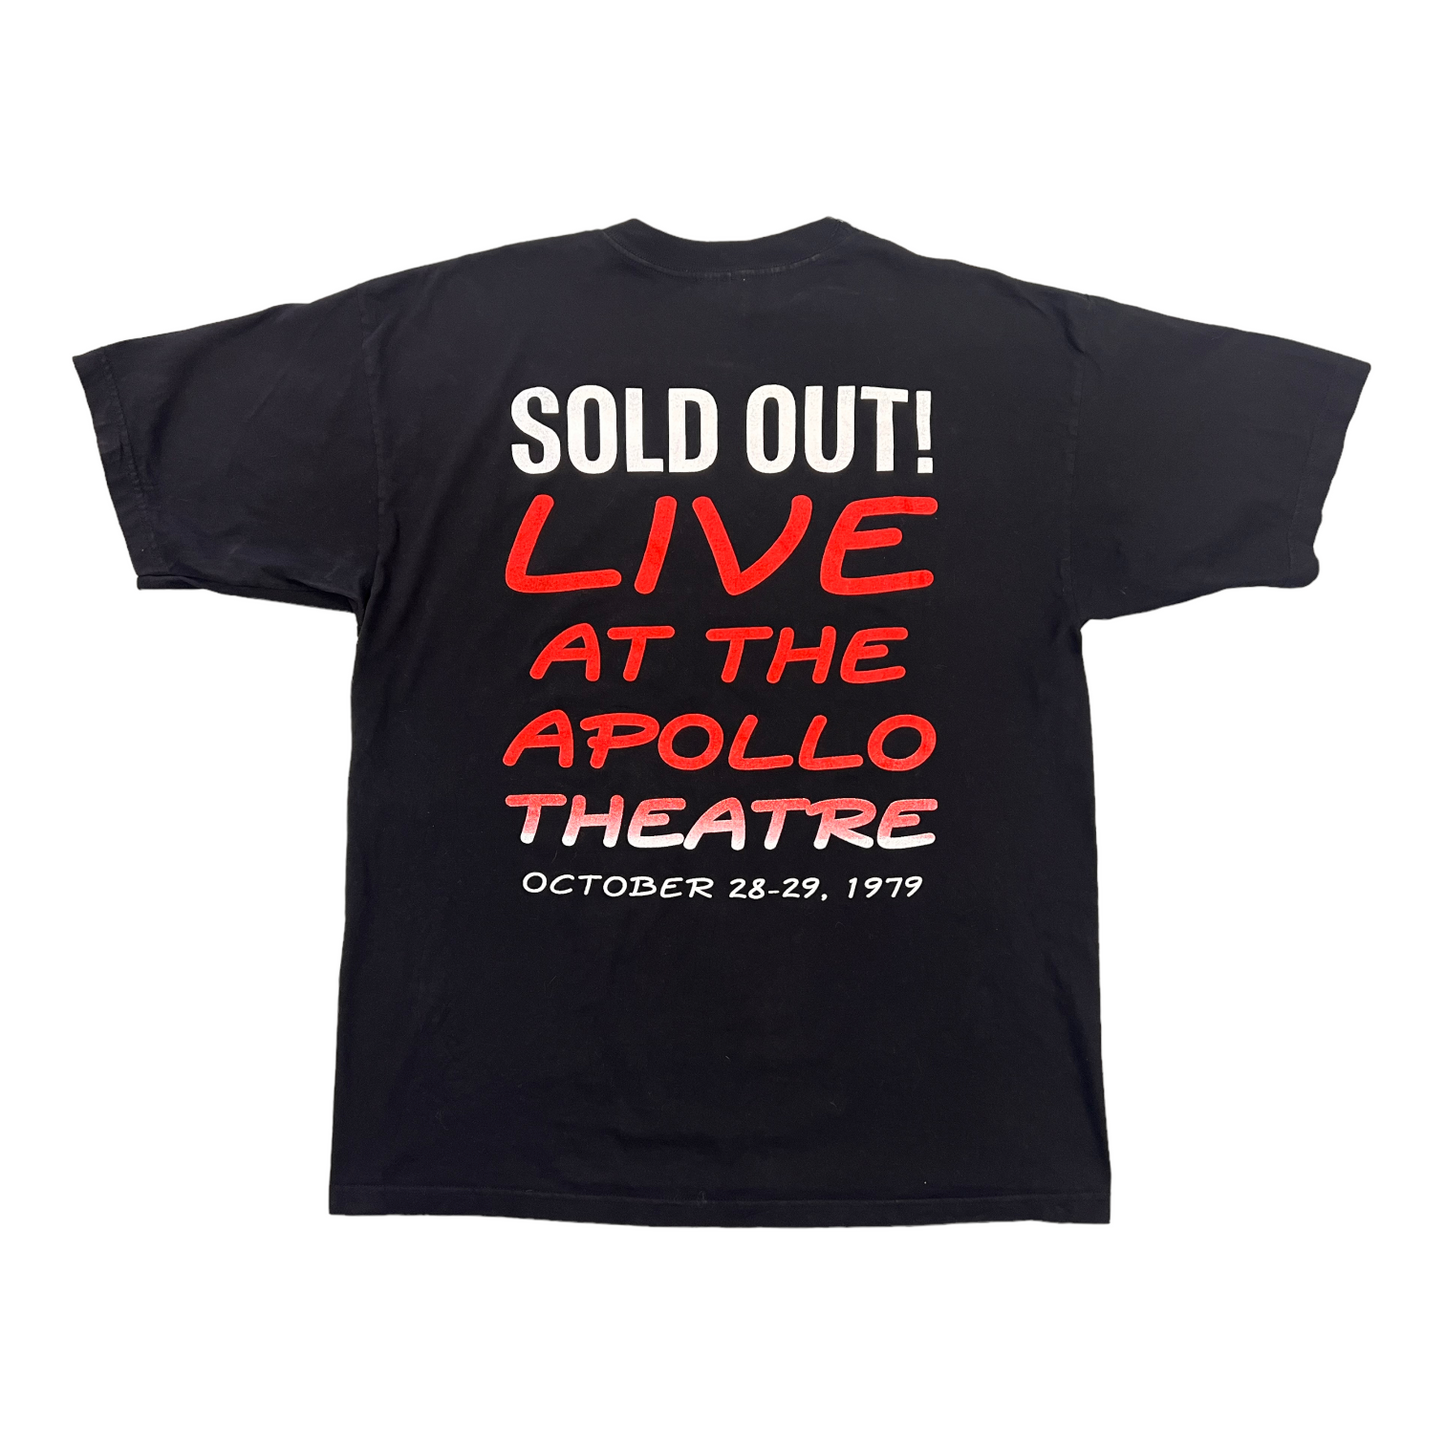 1997 Bob Marley "Sold out At the Apollo Theater vintage concert tee